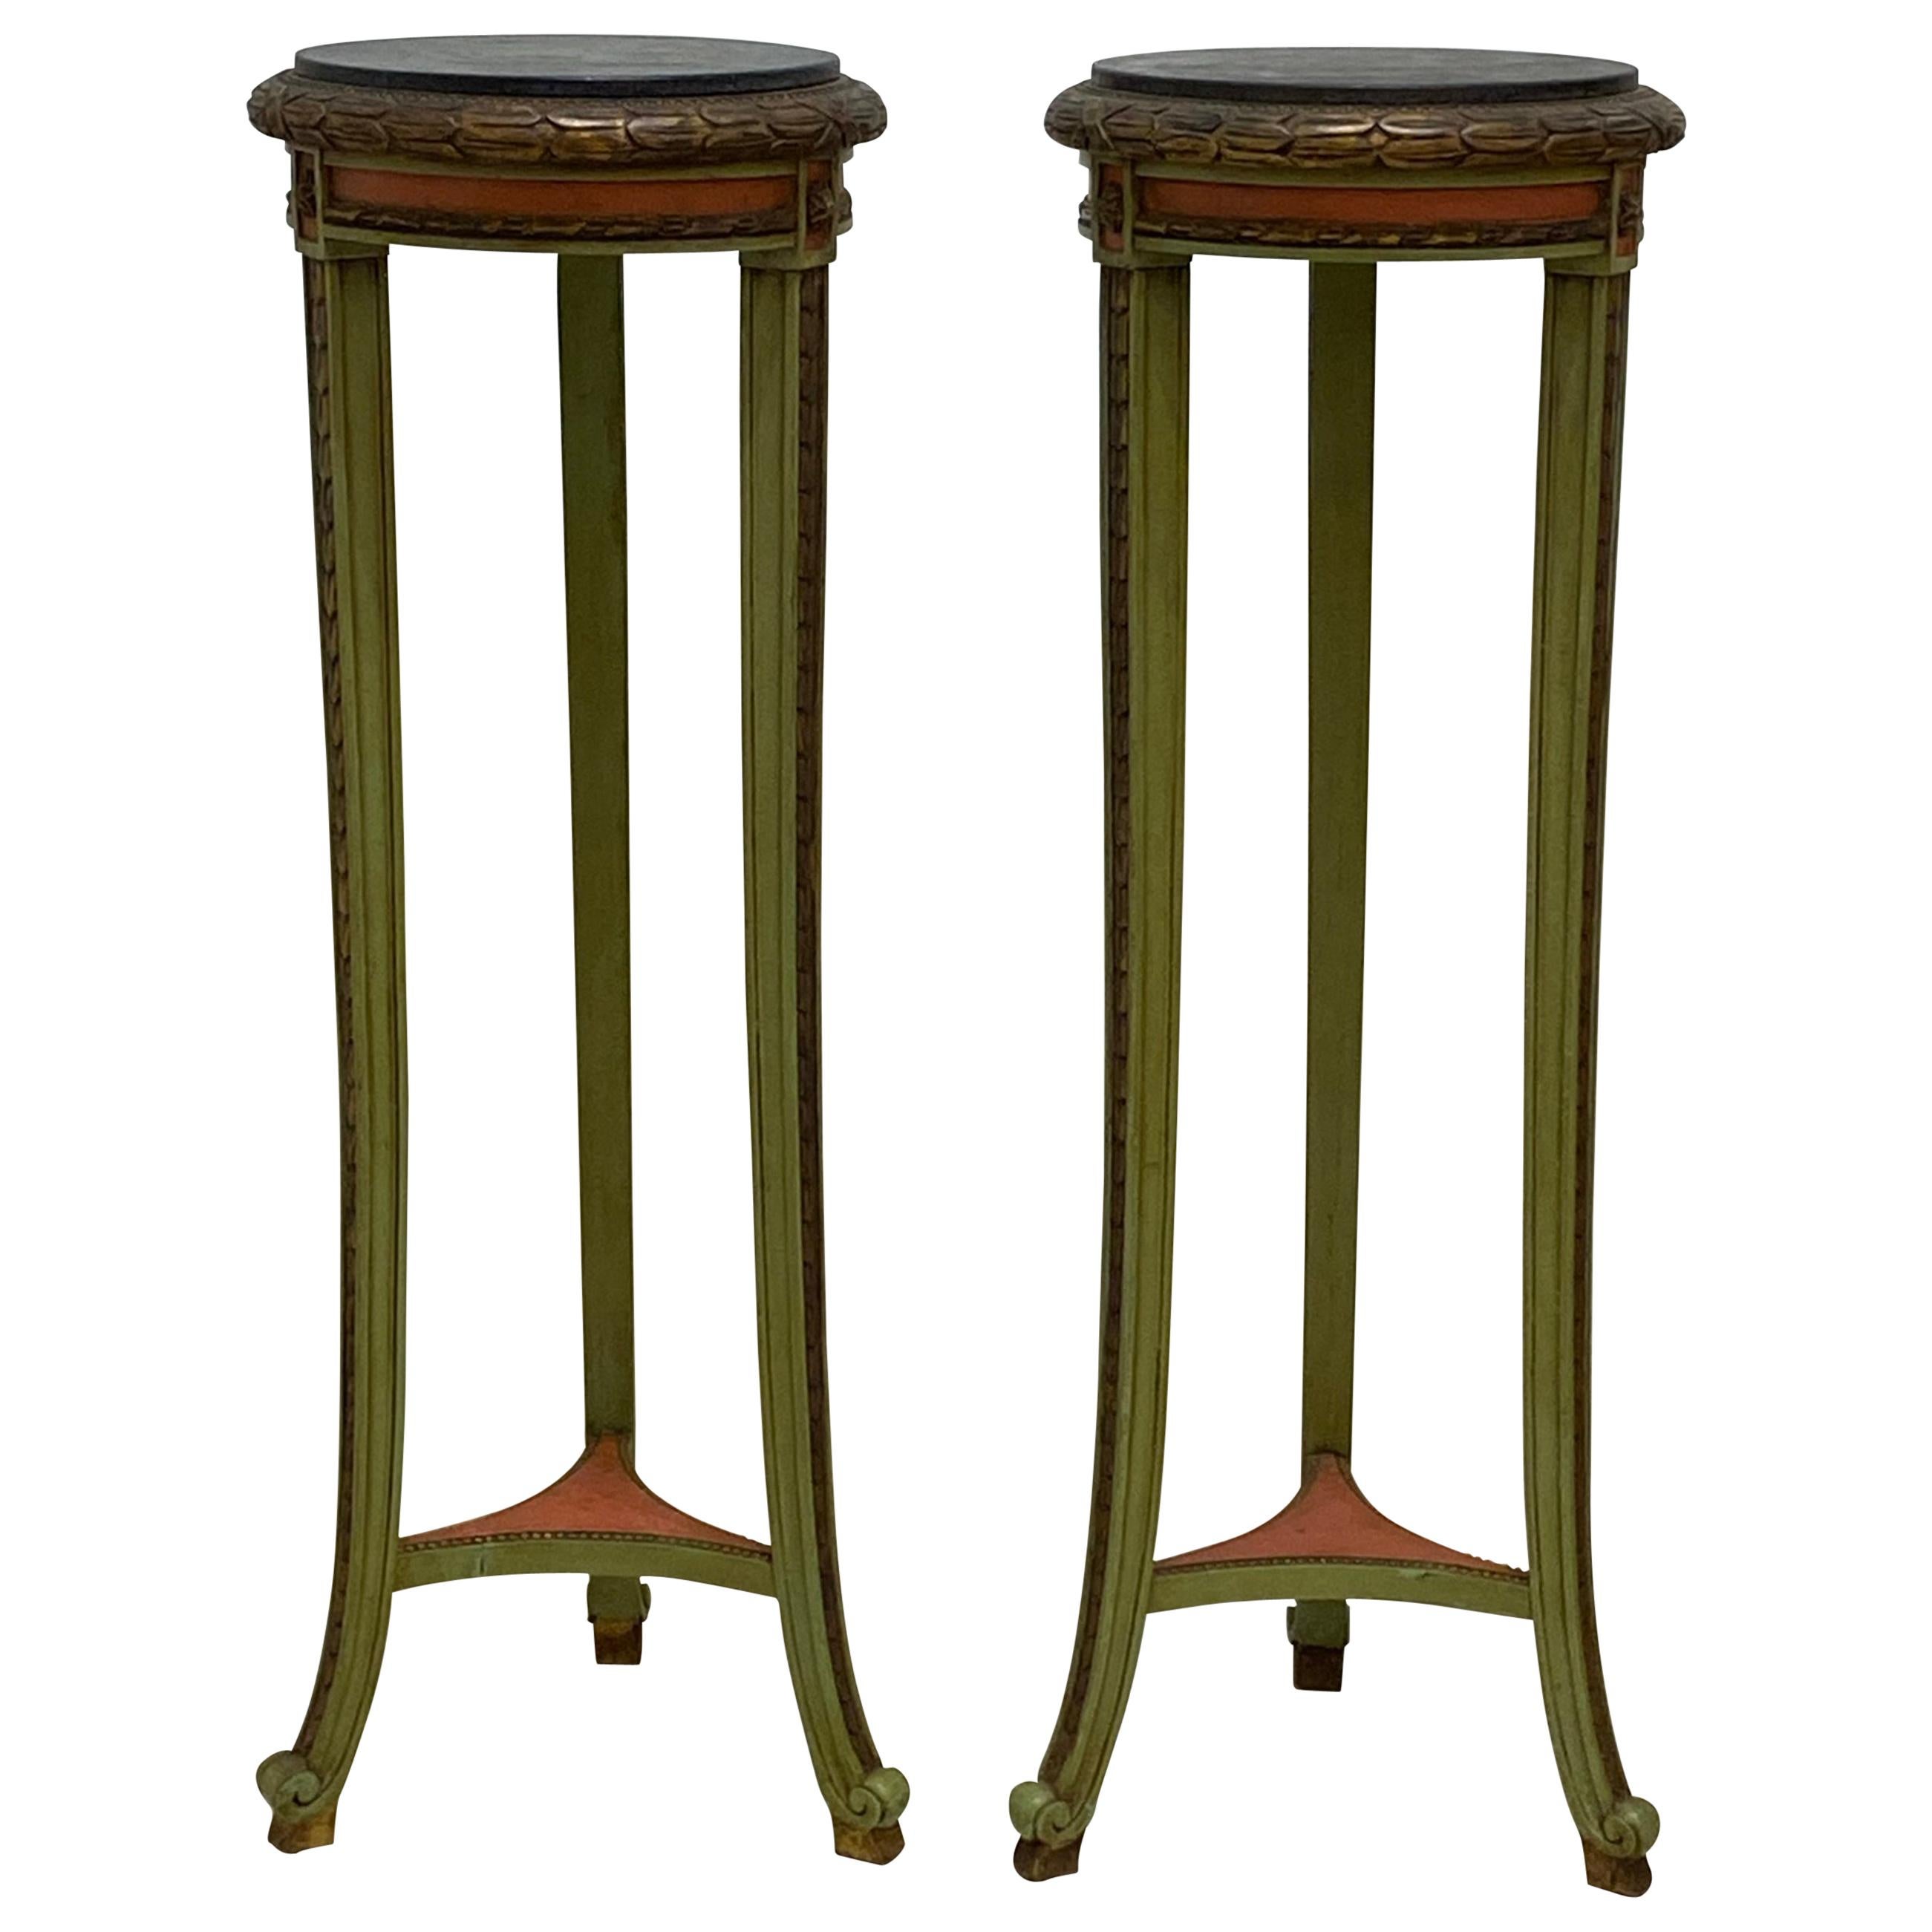 Tall Display Pedestals or Plant Stands, a Pair